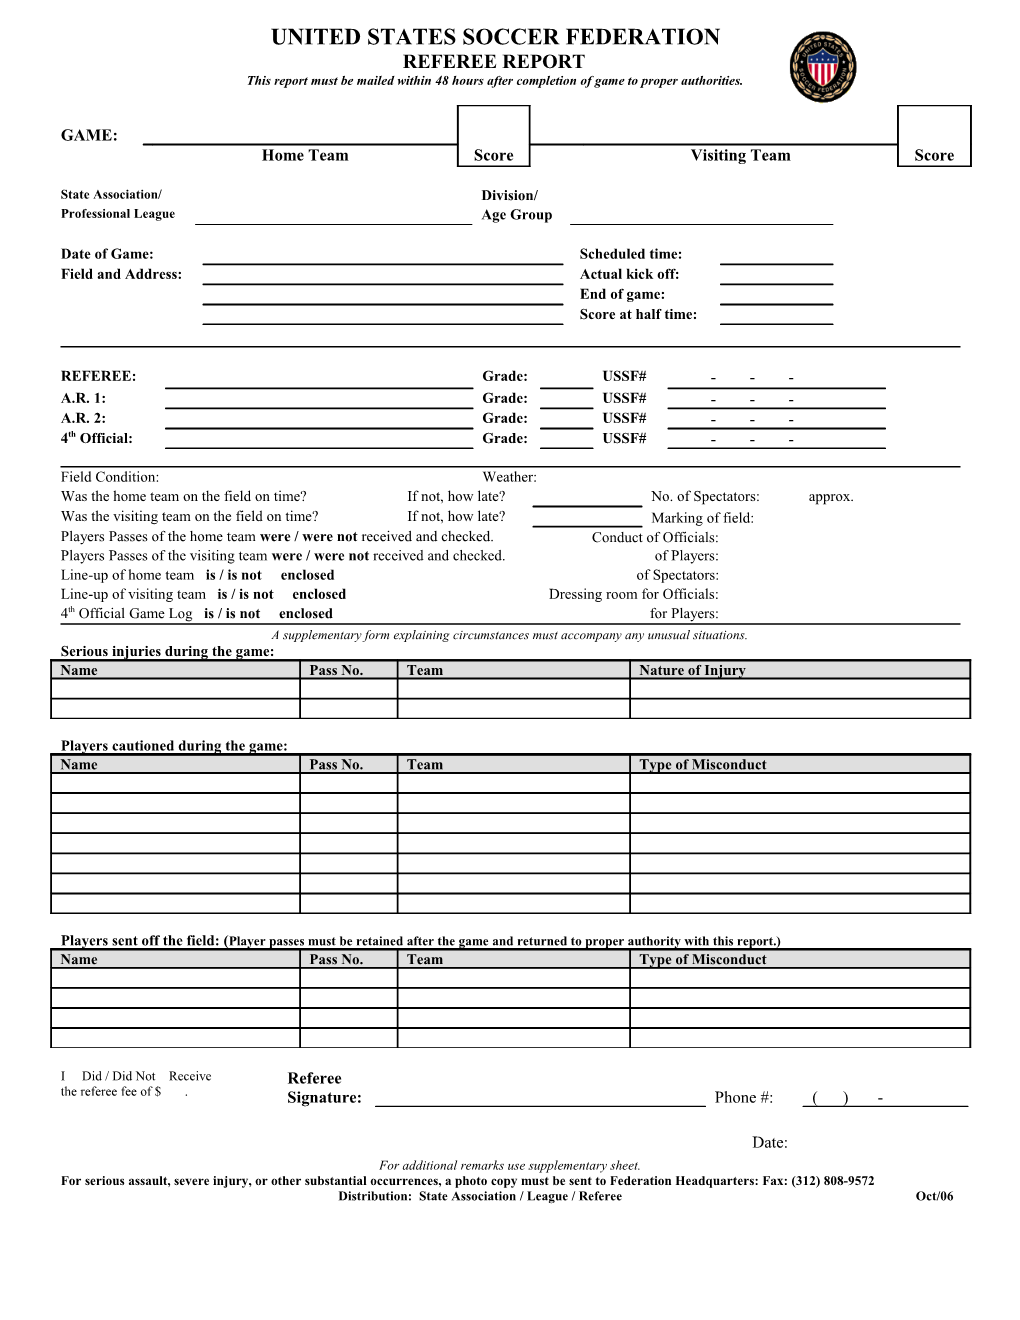 USSF Referee Report